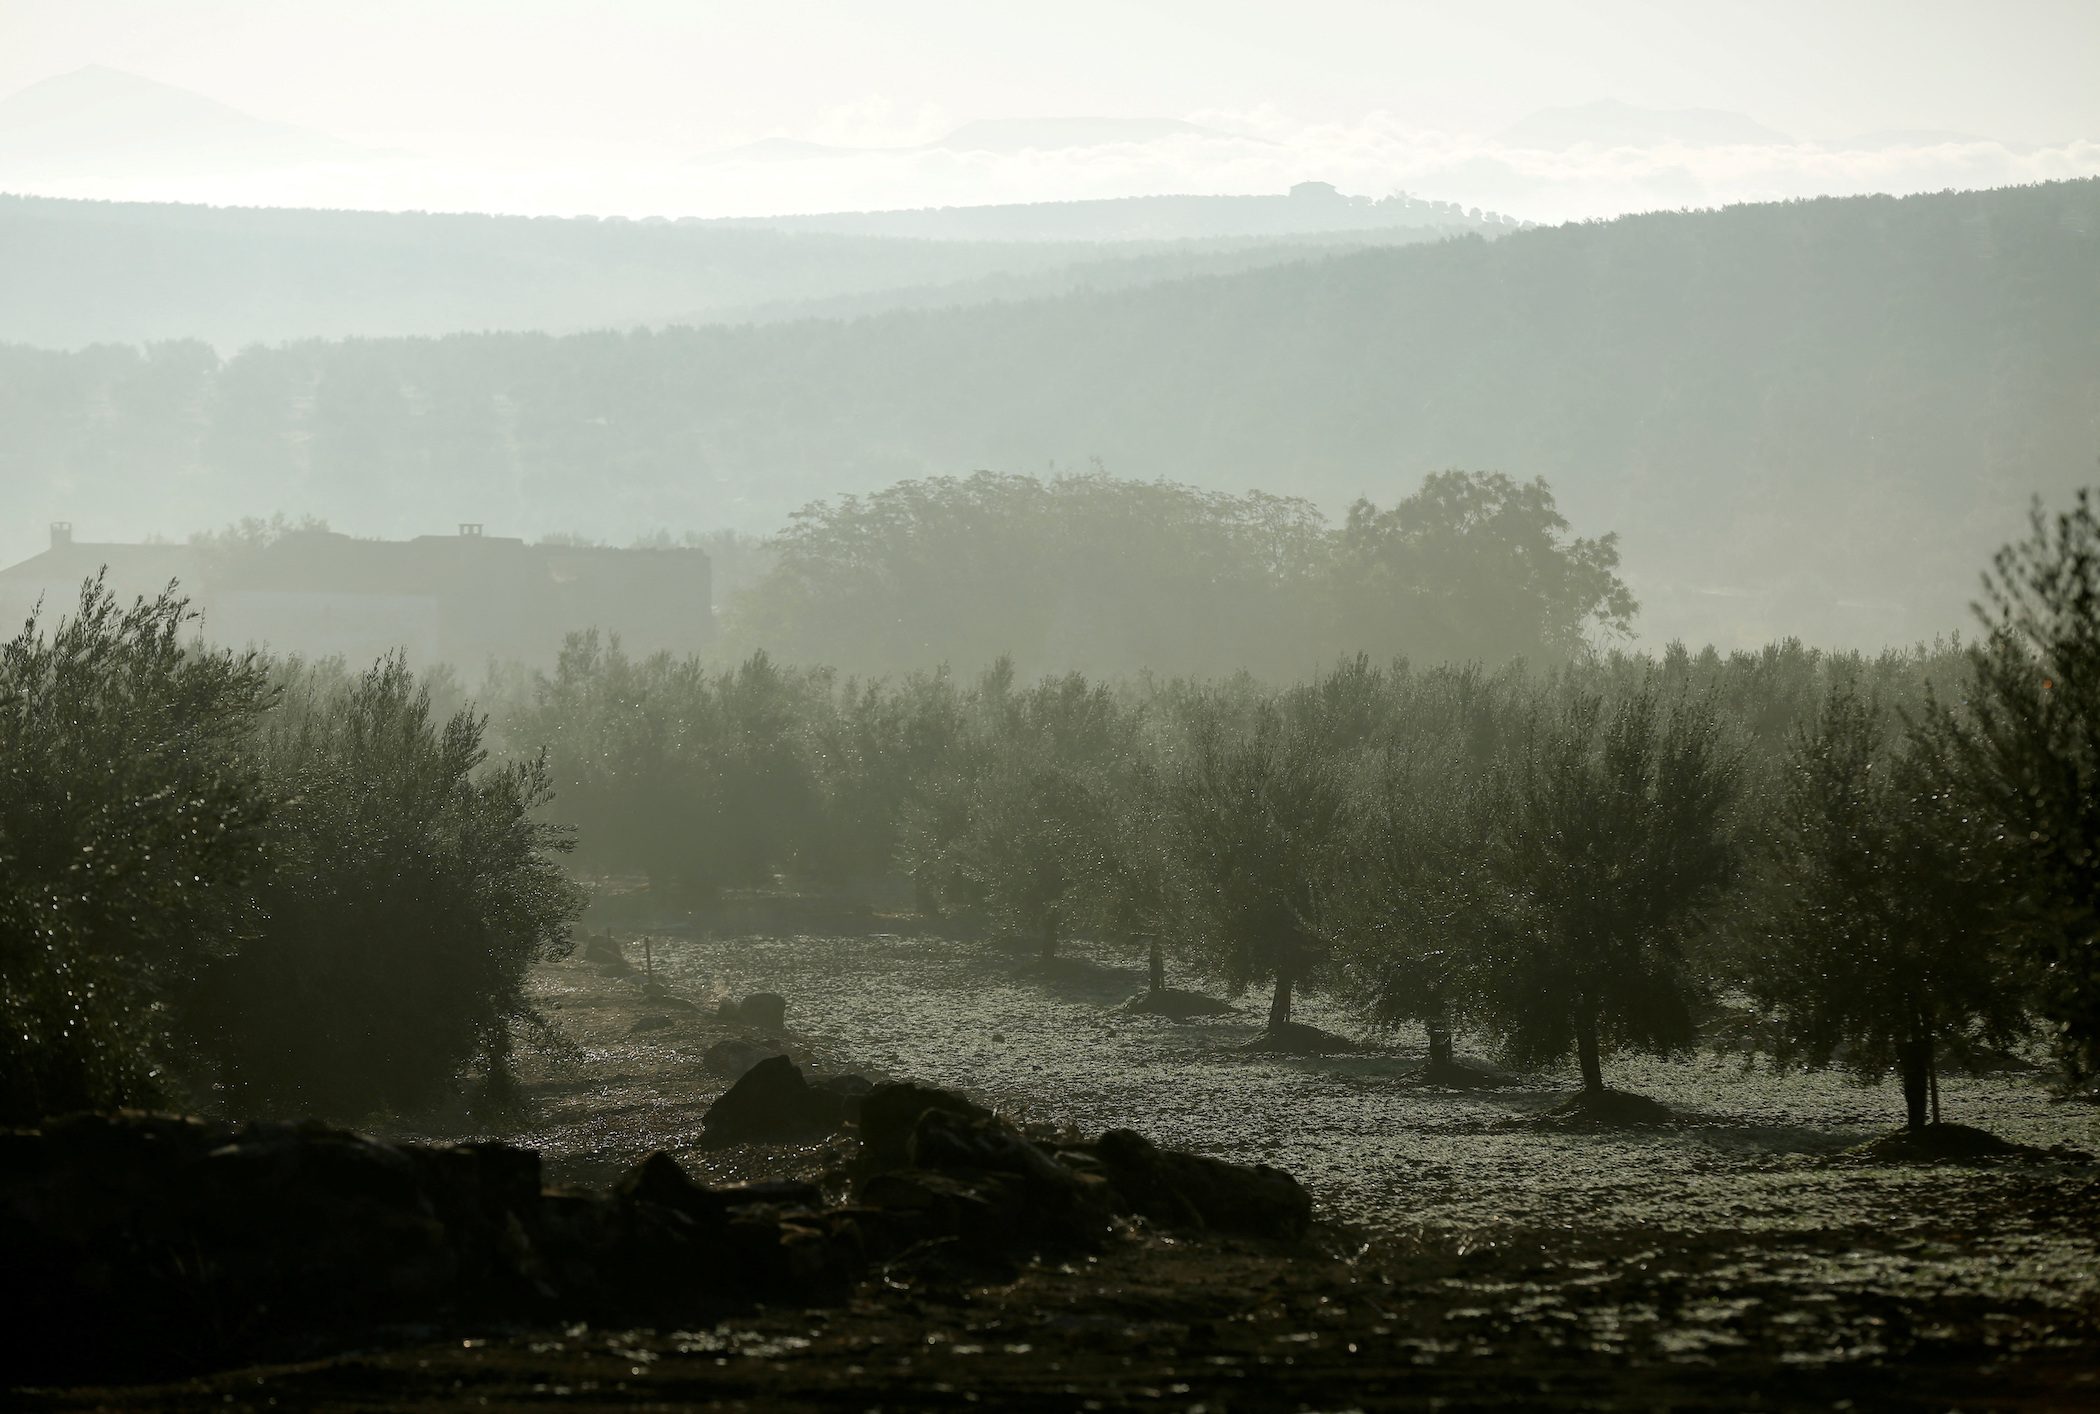 Spain’s drought devastates olive oil output, drives world prices up